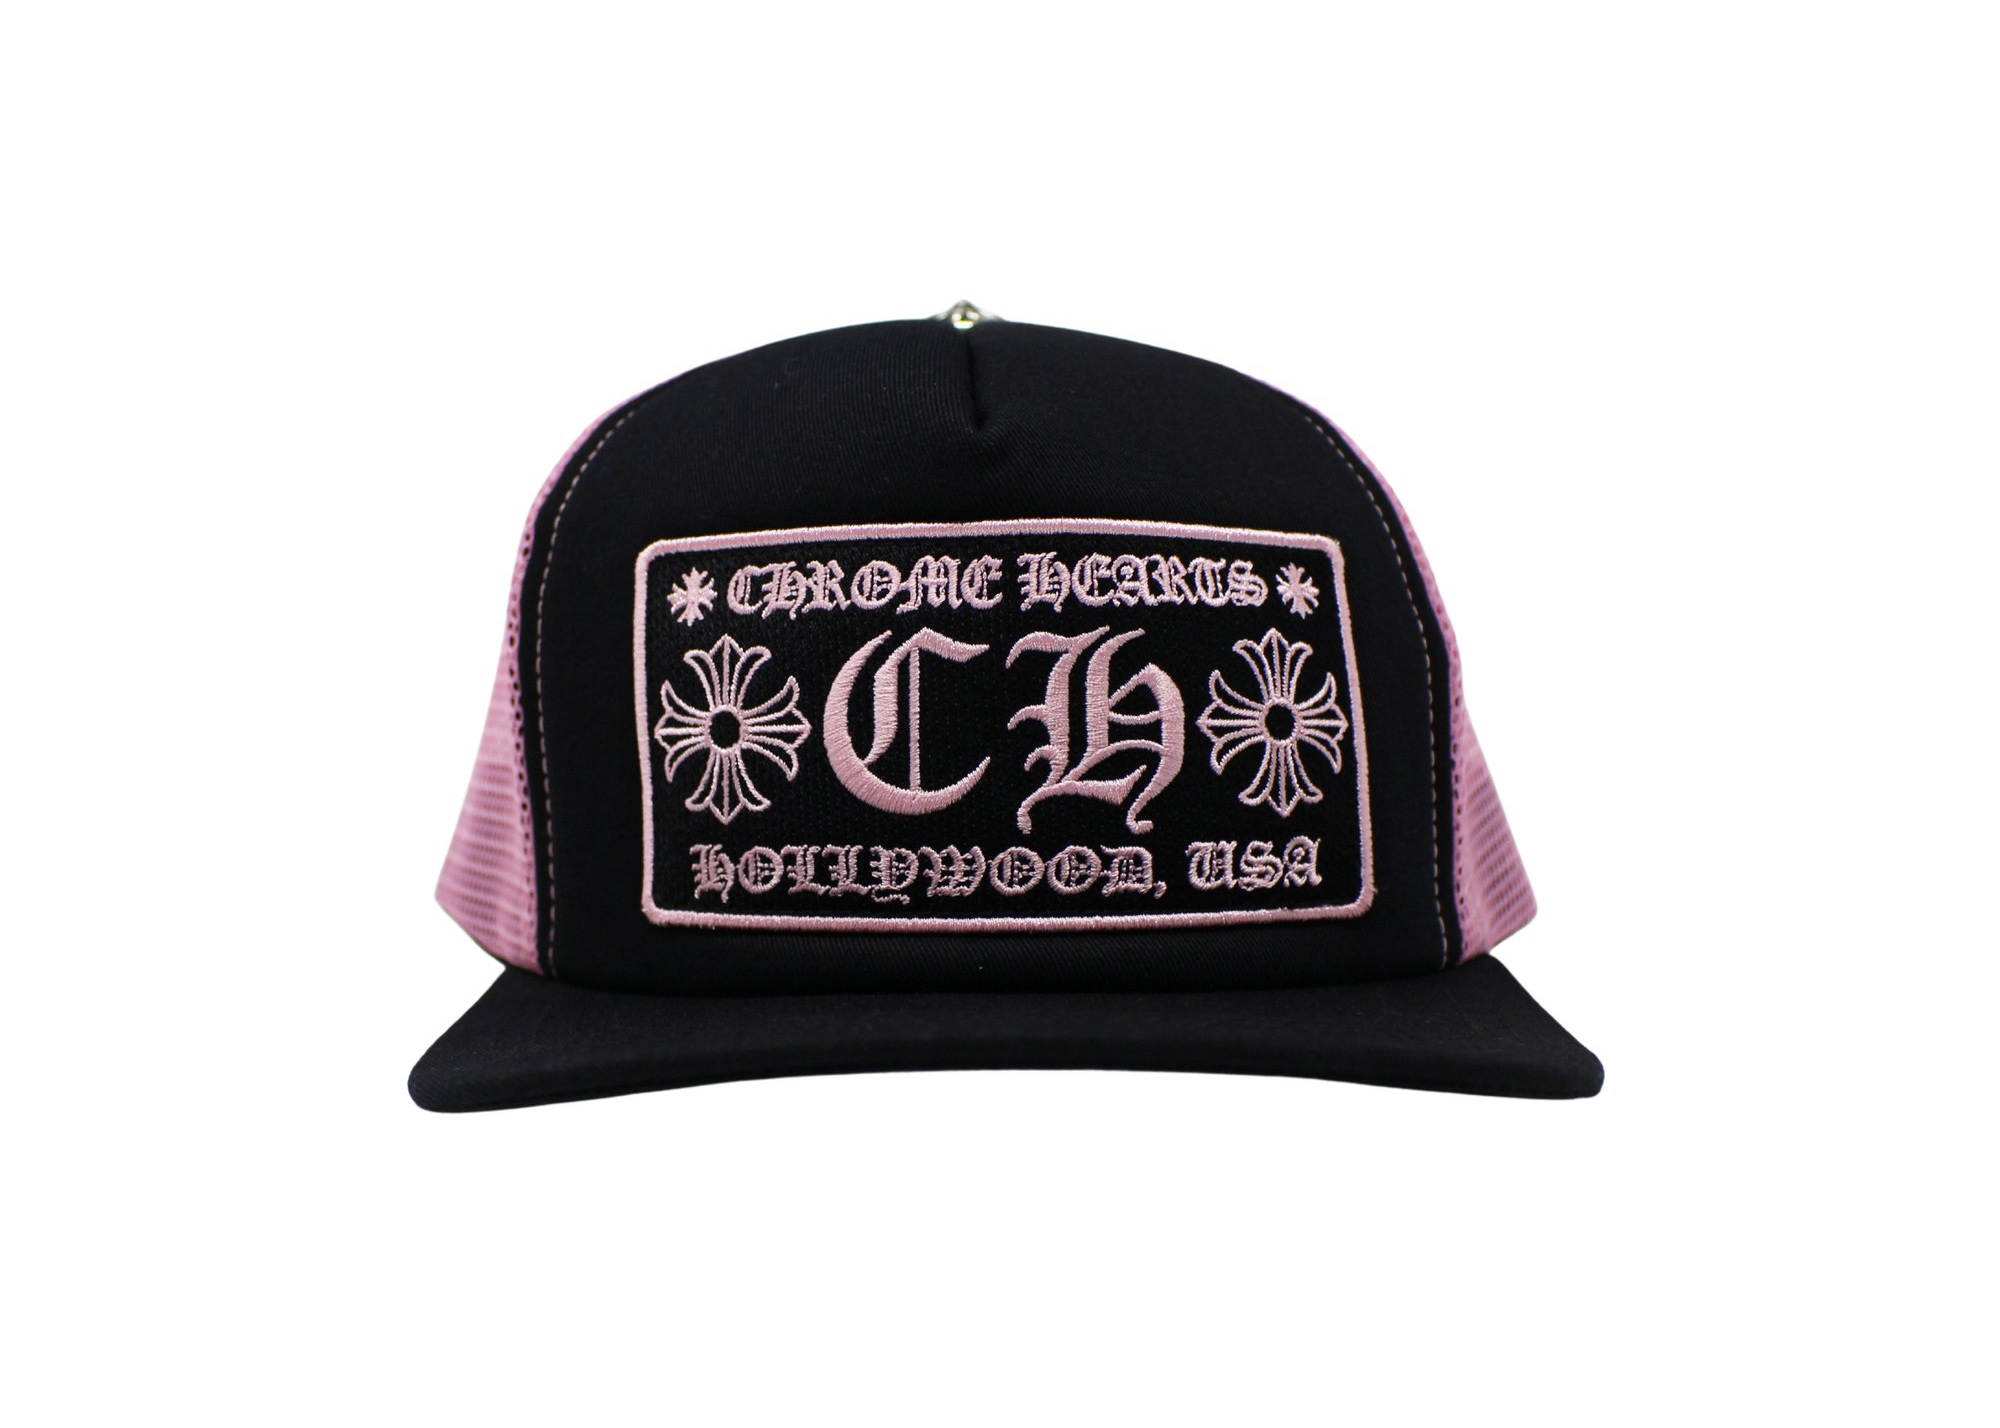 Chrome Hearts CH Hollywood Trucker Hat Black/Pink - JP